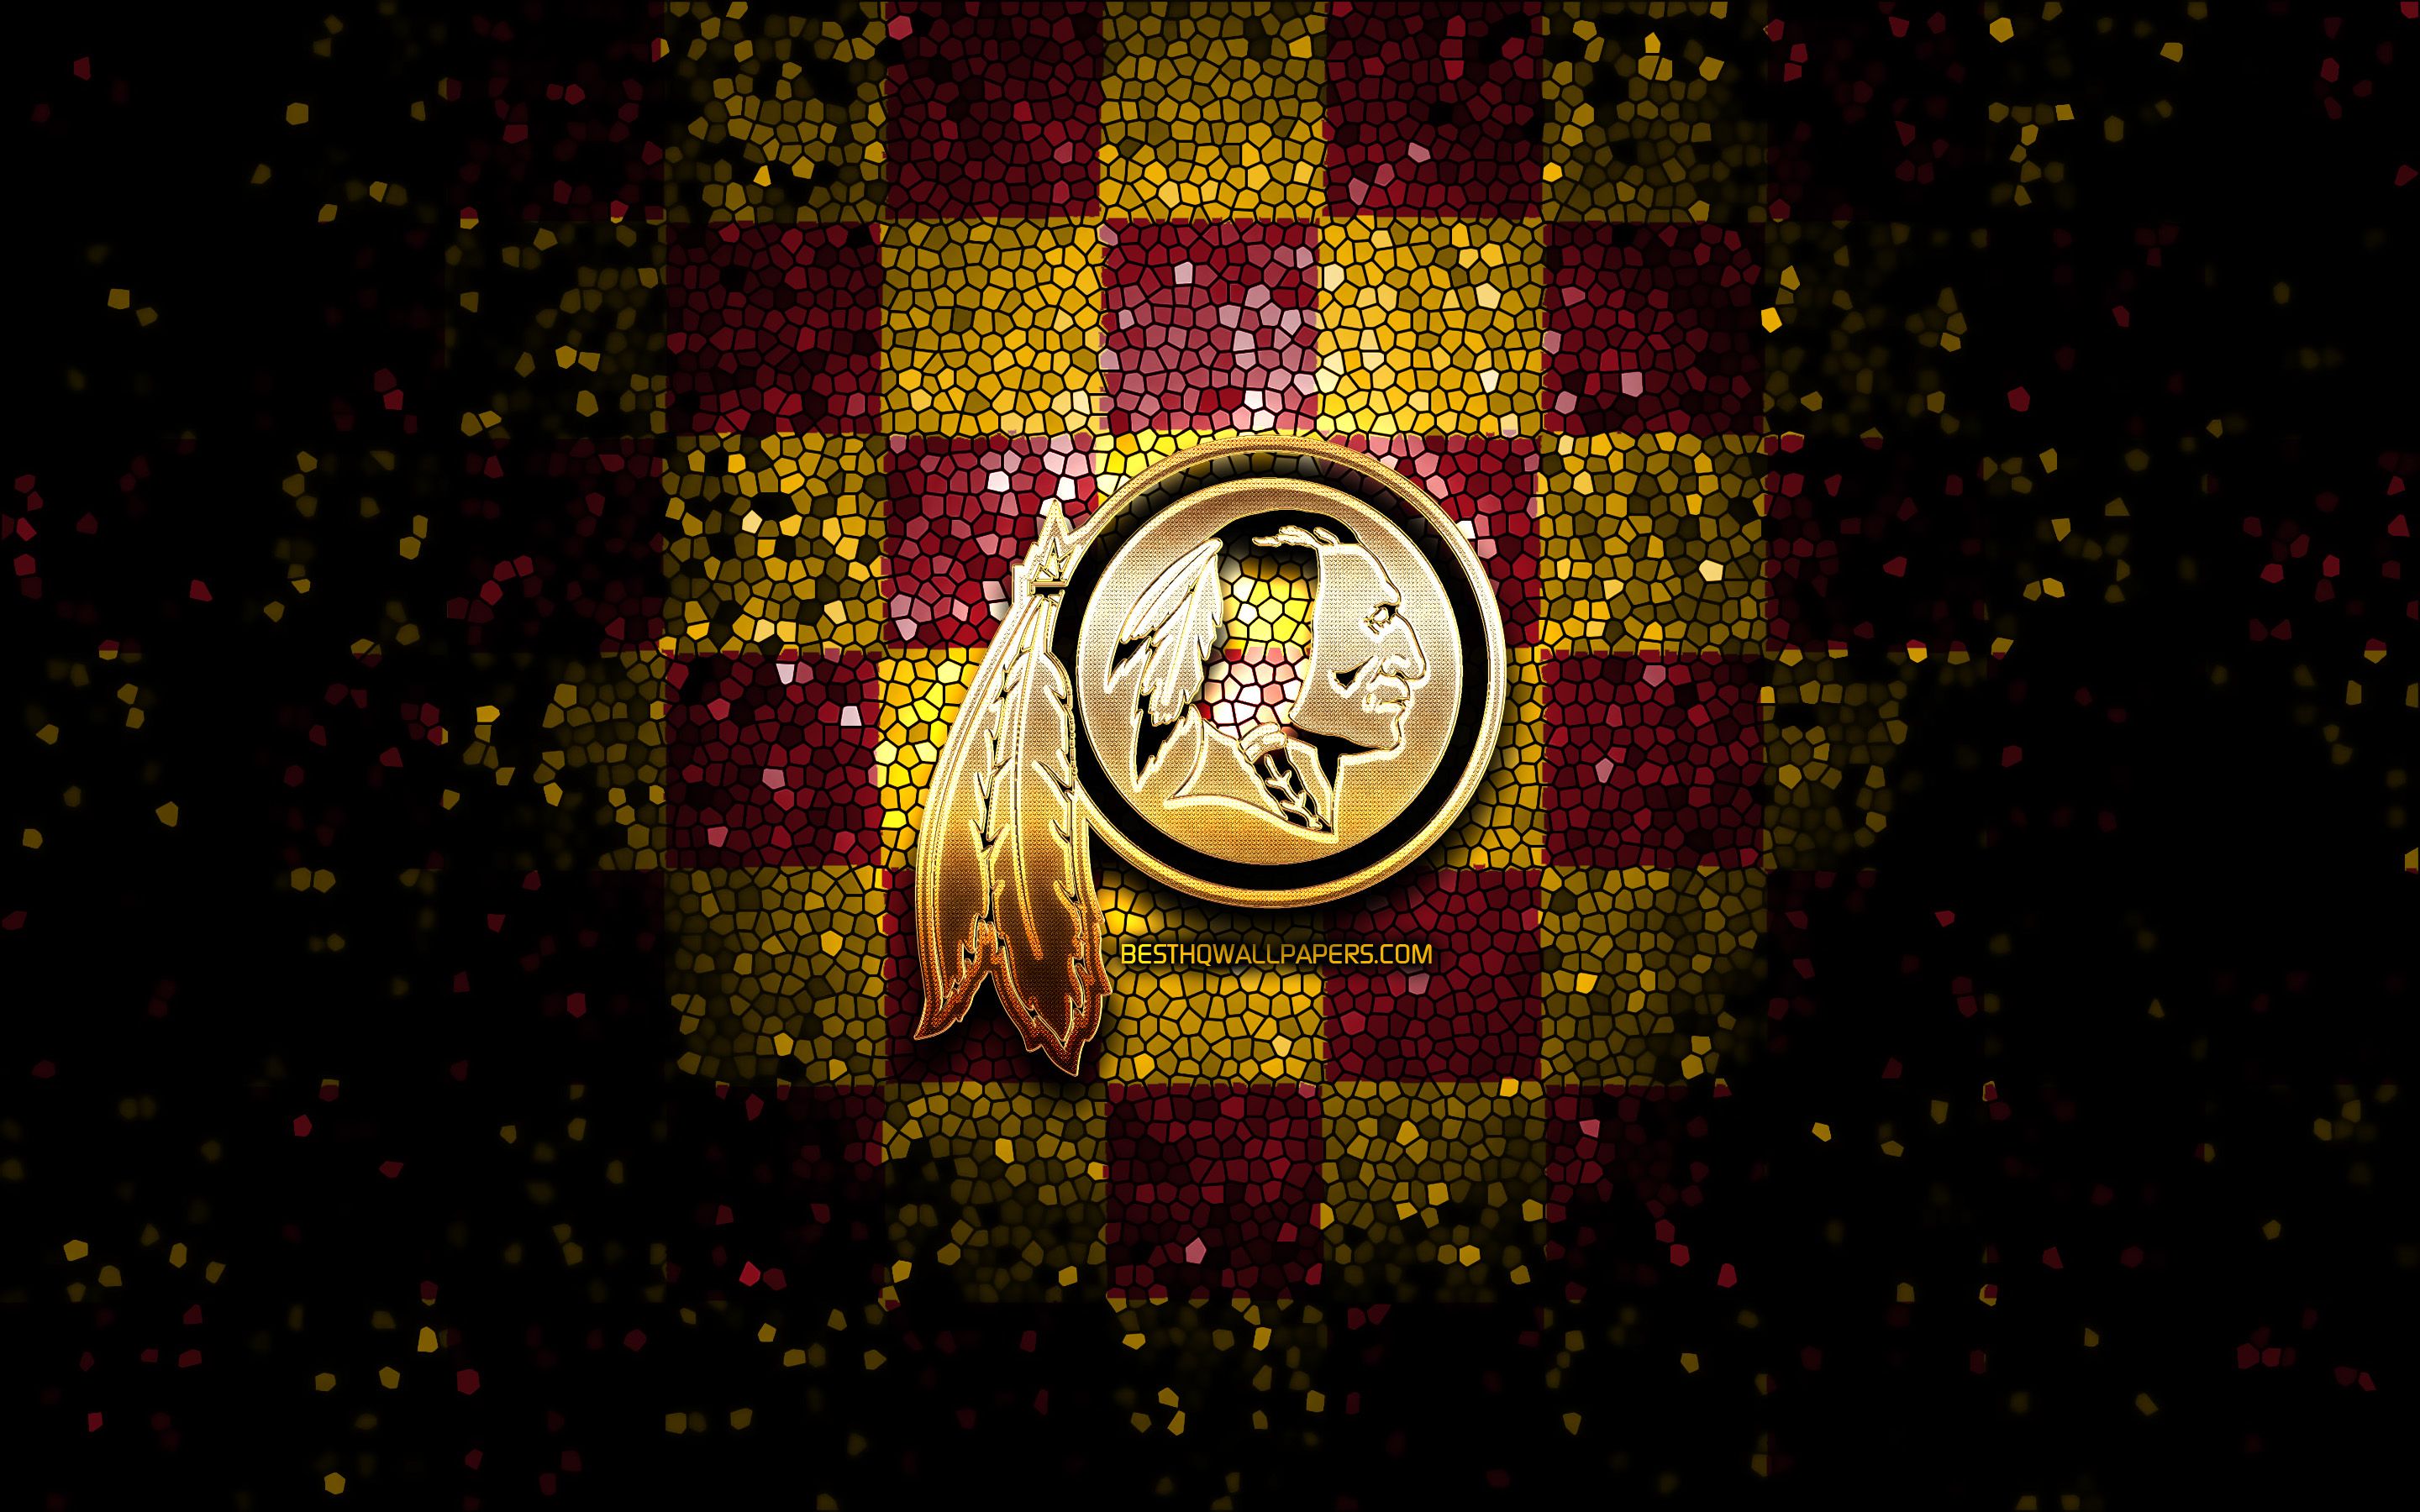 Download wallpaper Washington Redskins, glitter logo, NFL, purple yellow checkered background, USA, american football team, Washington Redskins logo, mosaic art, american football, America for desktop with resolution 2880x1800. High Quality HD picture